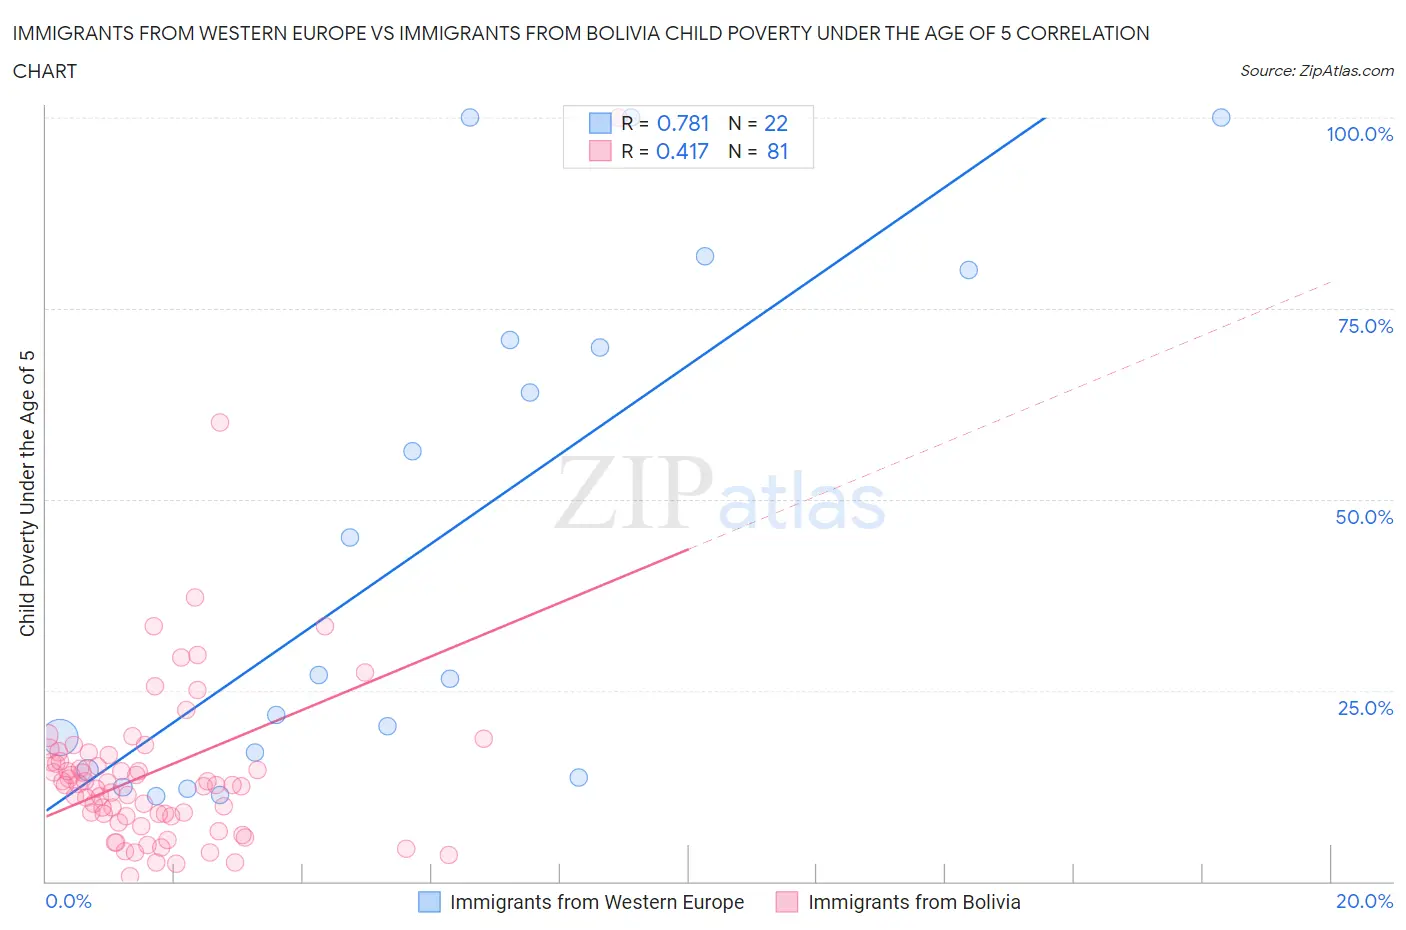 Immigrants from Western Europe vs Immigrants from Bolivia Child Poverty Under the Age of 5